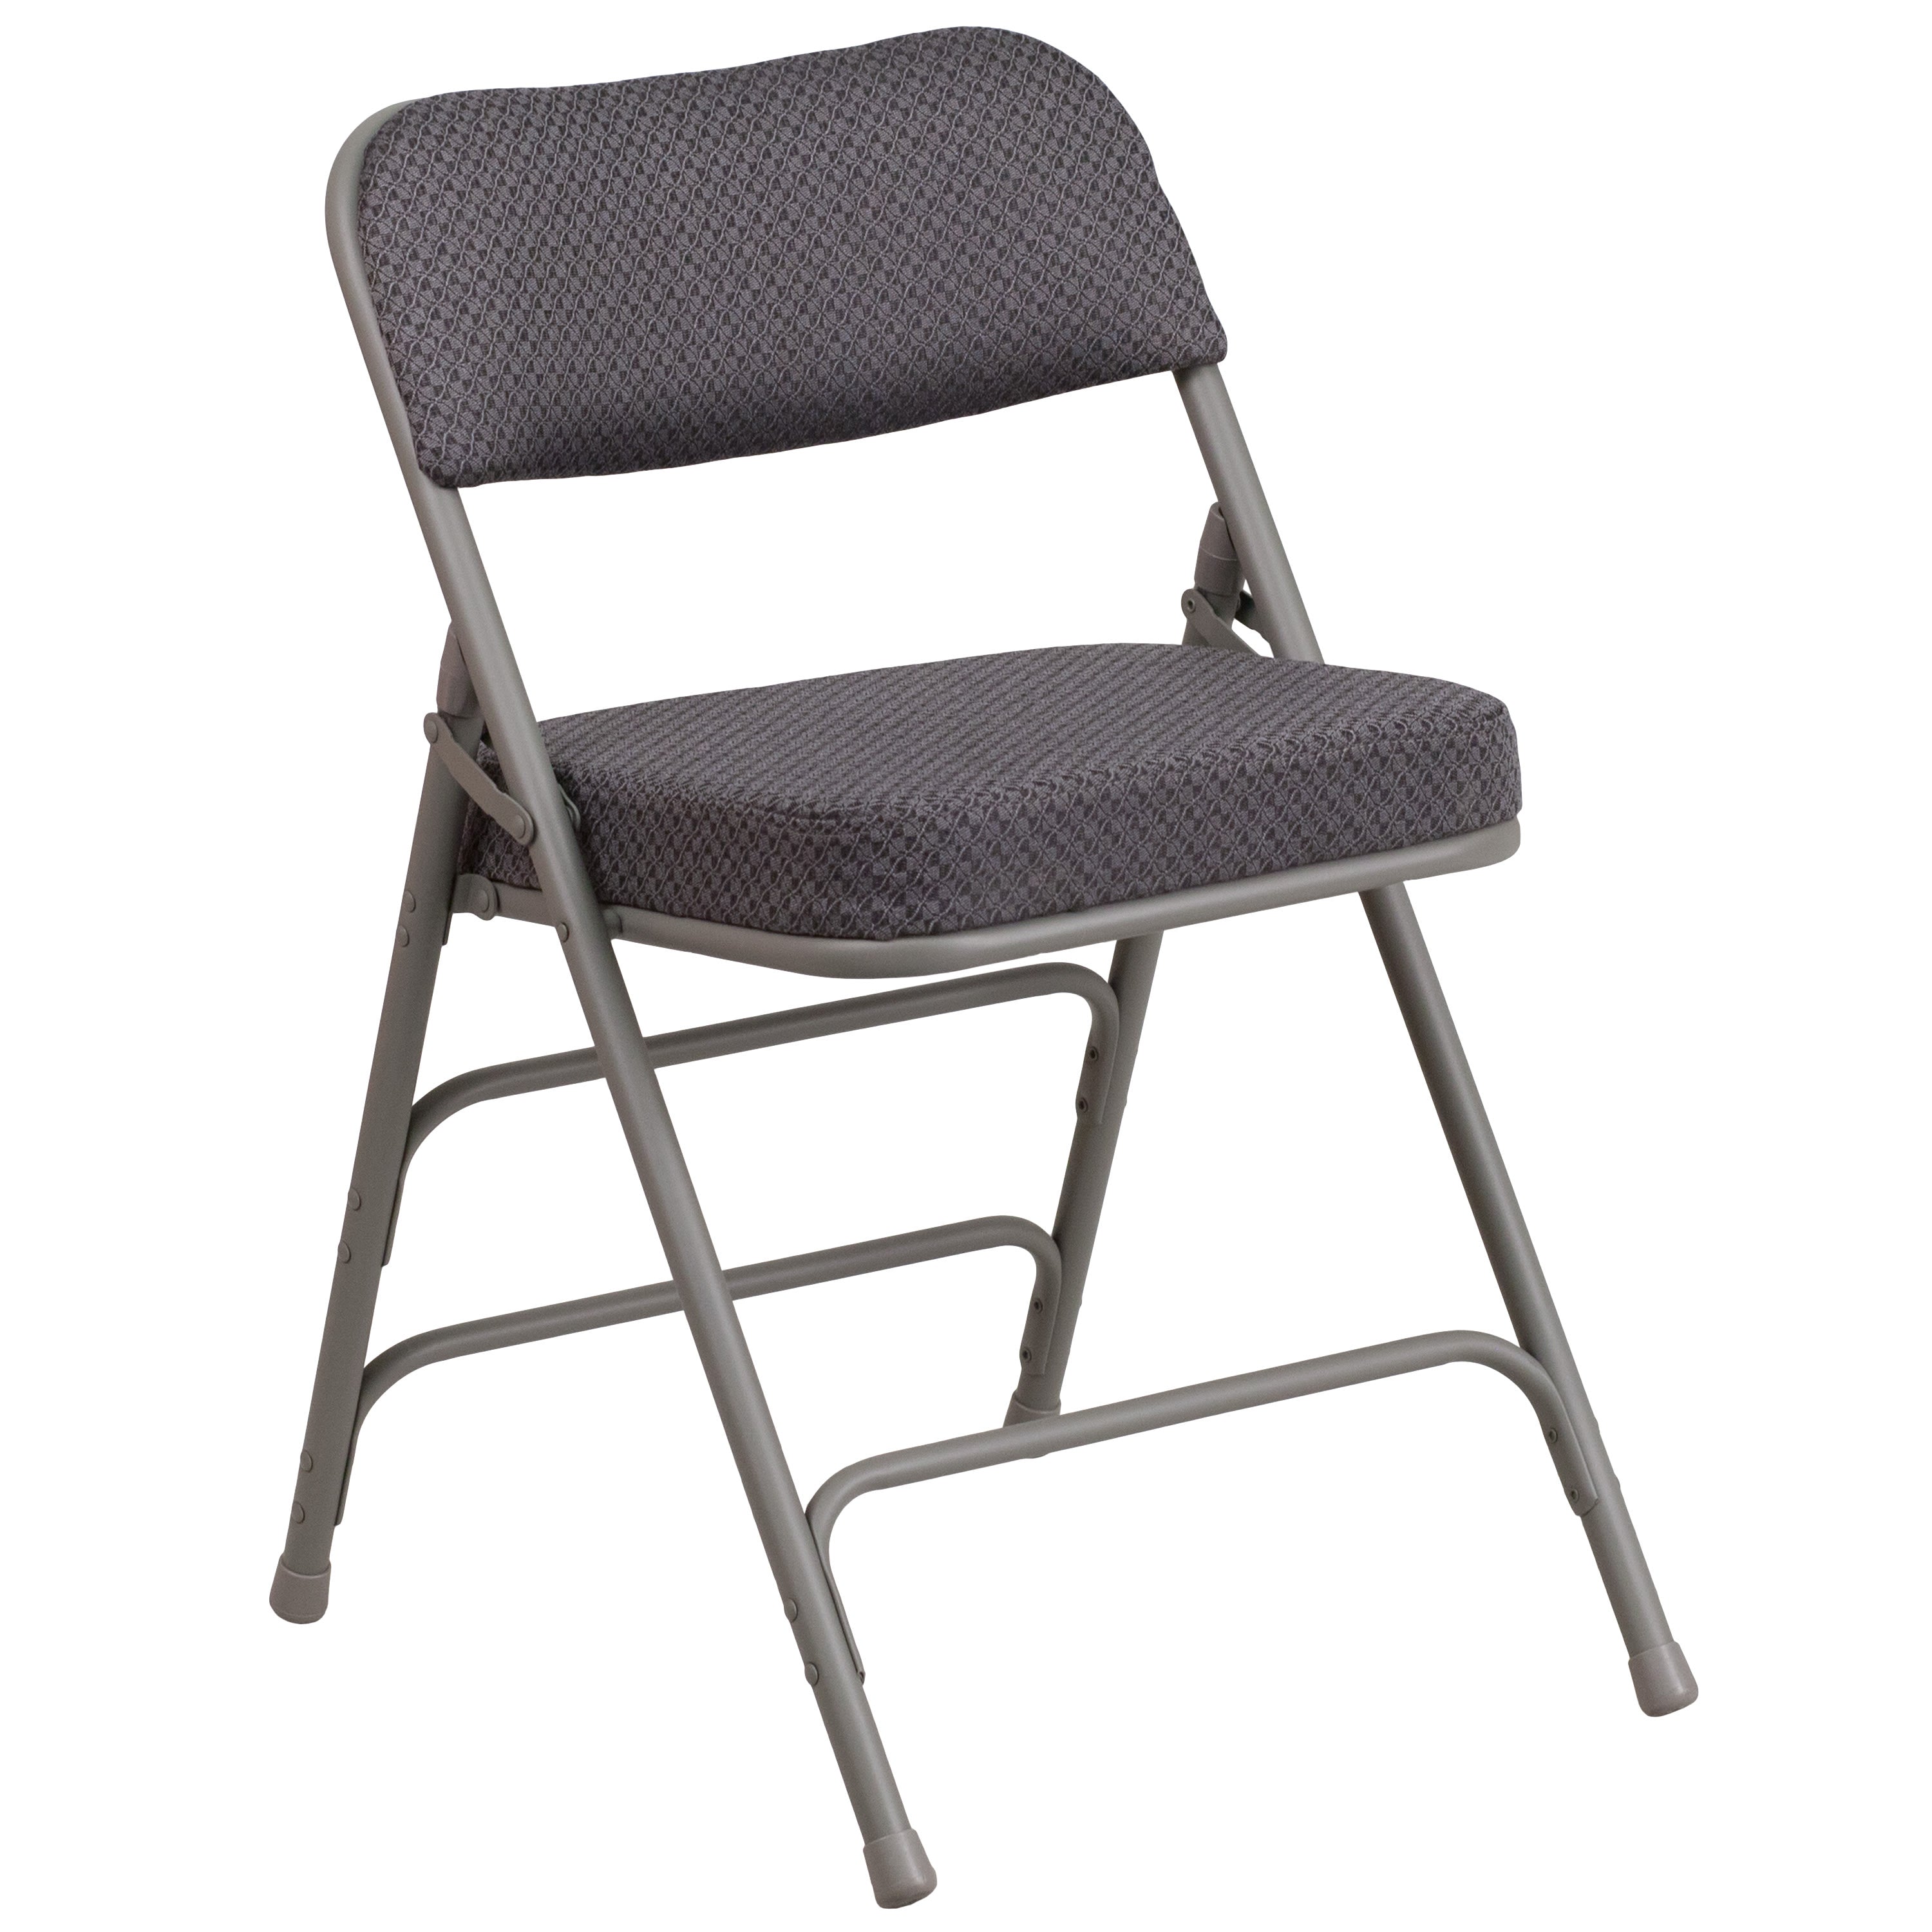 Padded Folding Chair AW-MC320AF- – Folding Chairs 4 Less